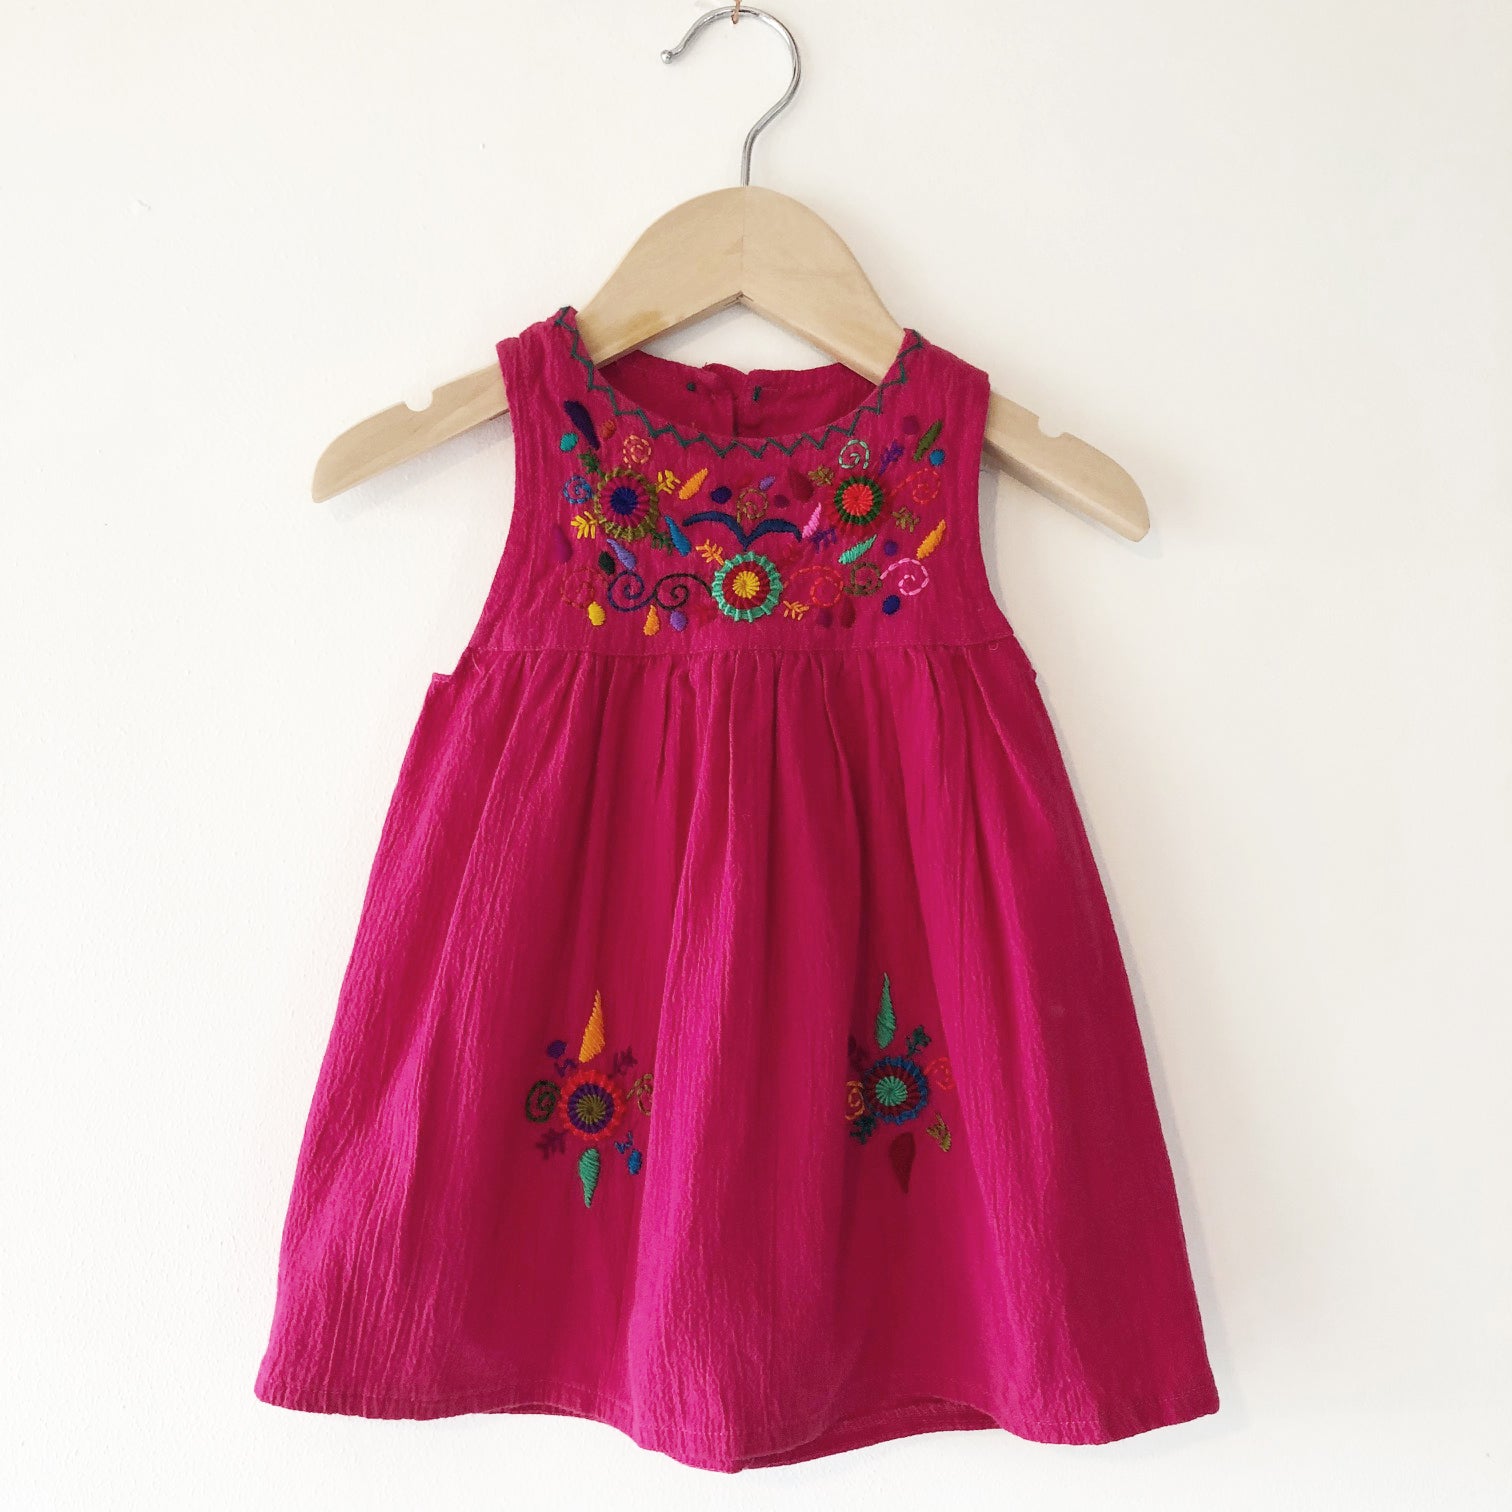 Oaxacan Embroidery Dress size 12 months